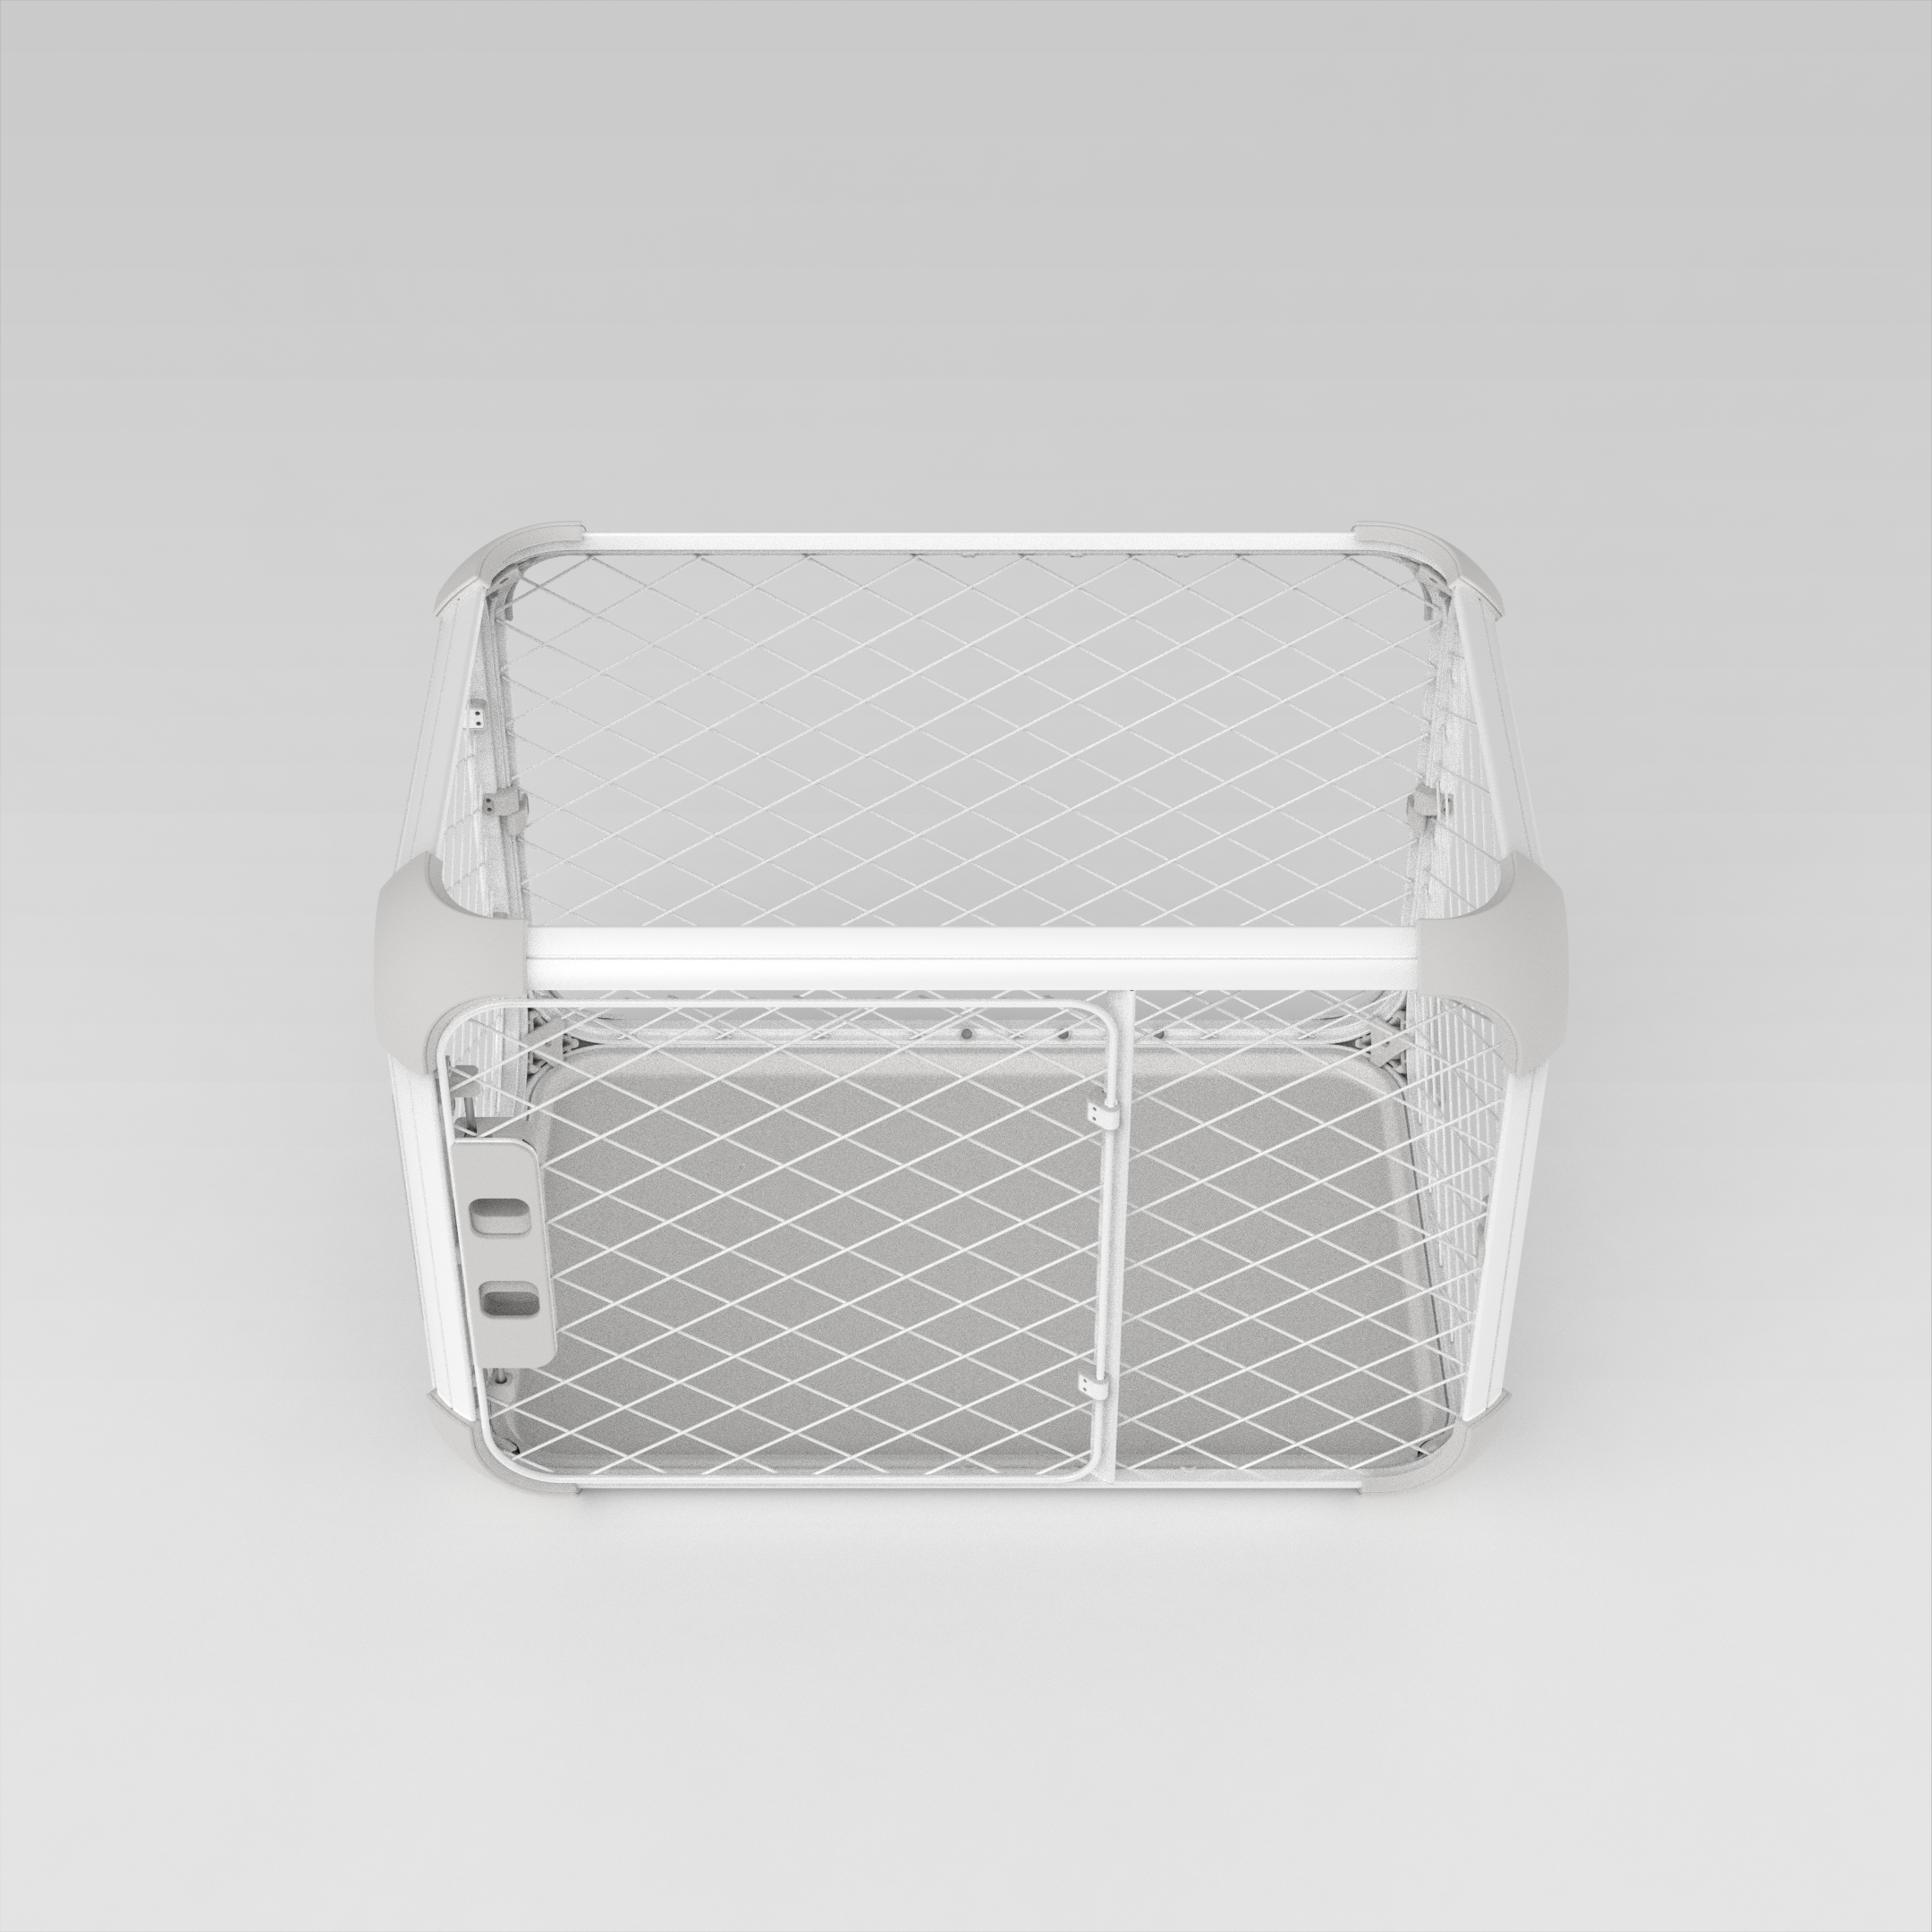 Side view of Evolv Dog Crate in Playpen Mode, with ceiling mesh removed and additional top frame added.